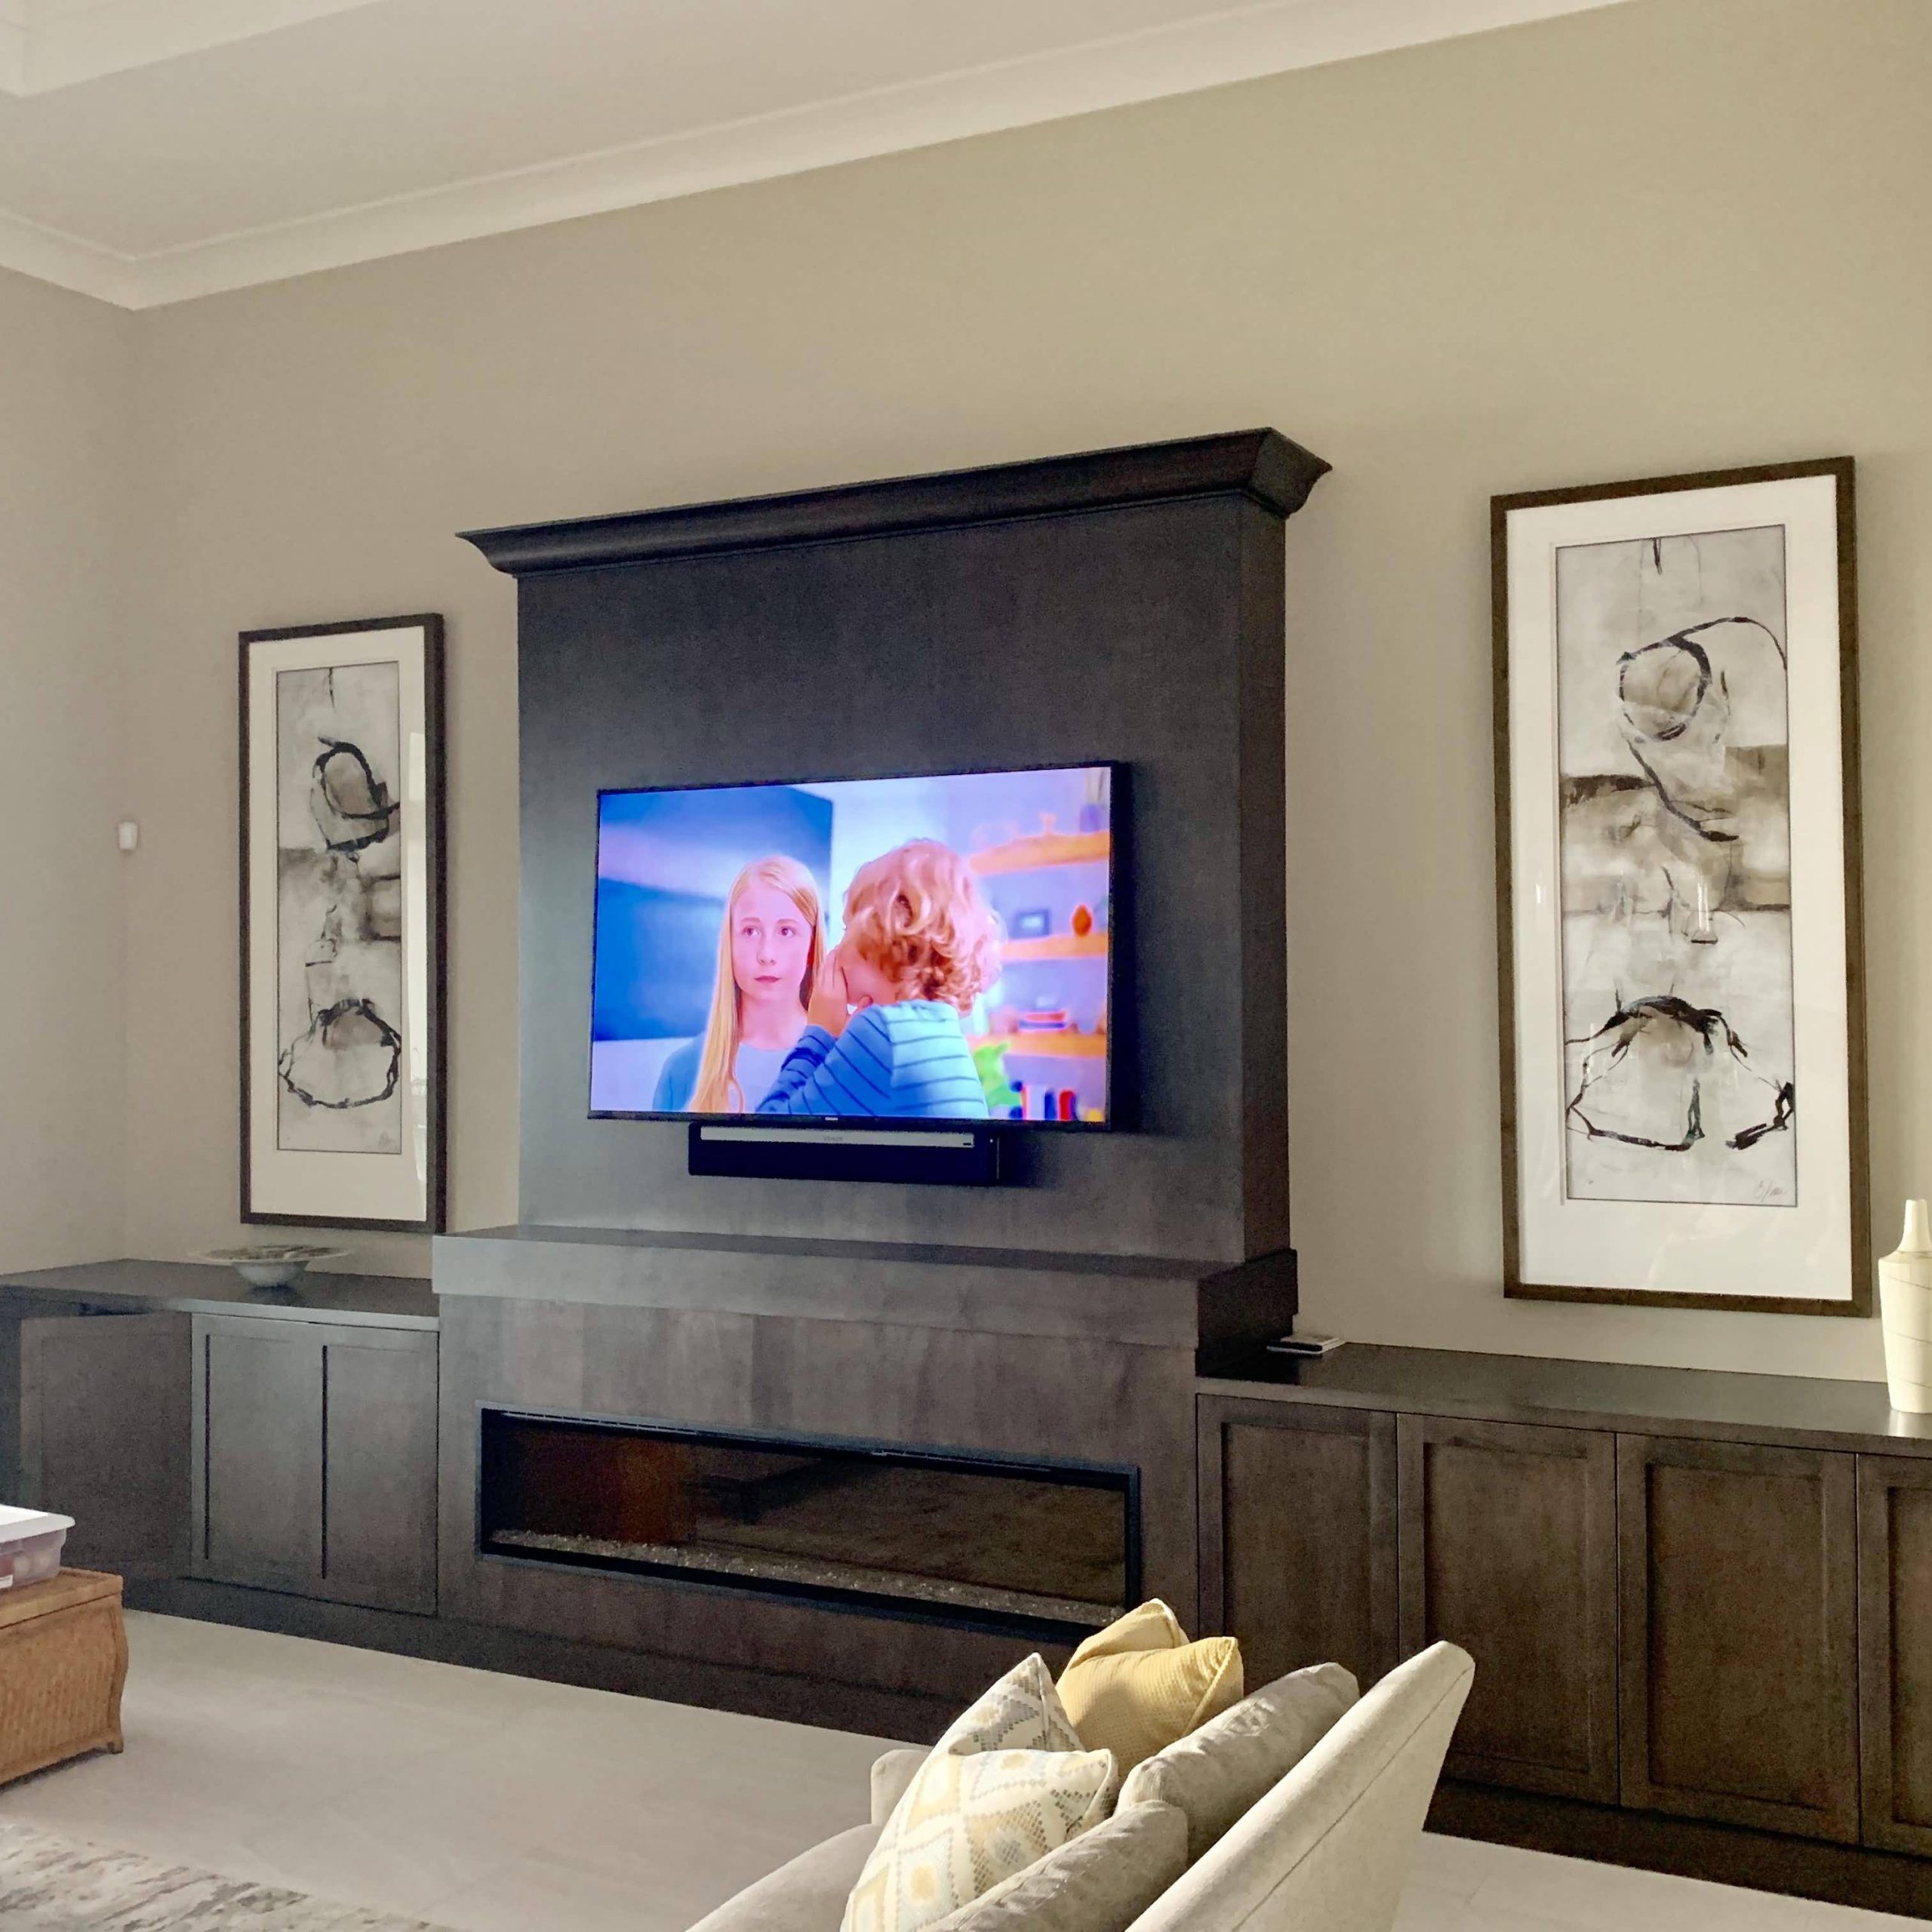 Walnut Large Entertainment Center With Fireplace – Pohl Custom Cabinets Pertaining To Walnut Entertainment Centers (Gallery 6 of 20)